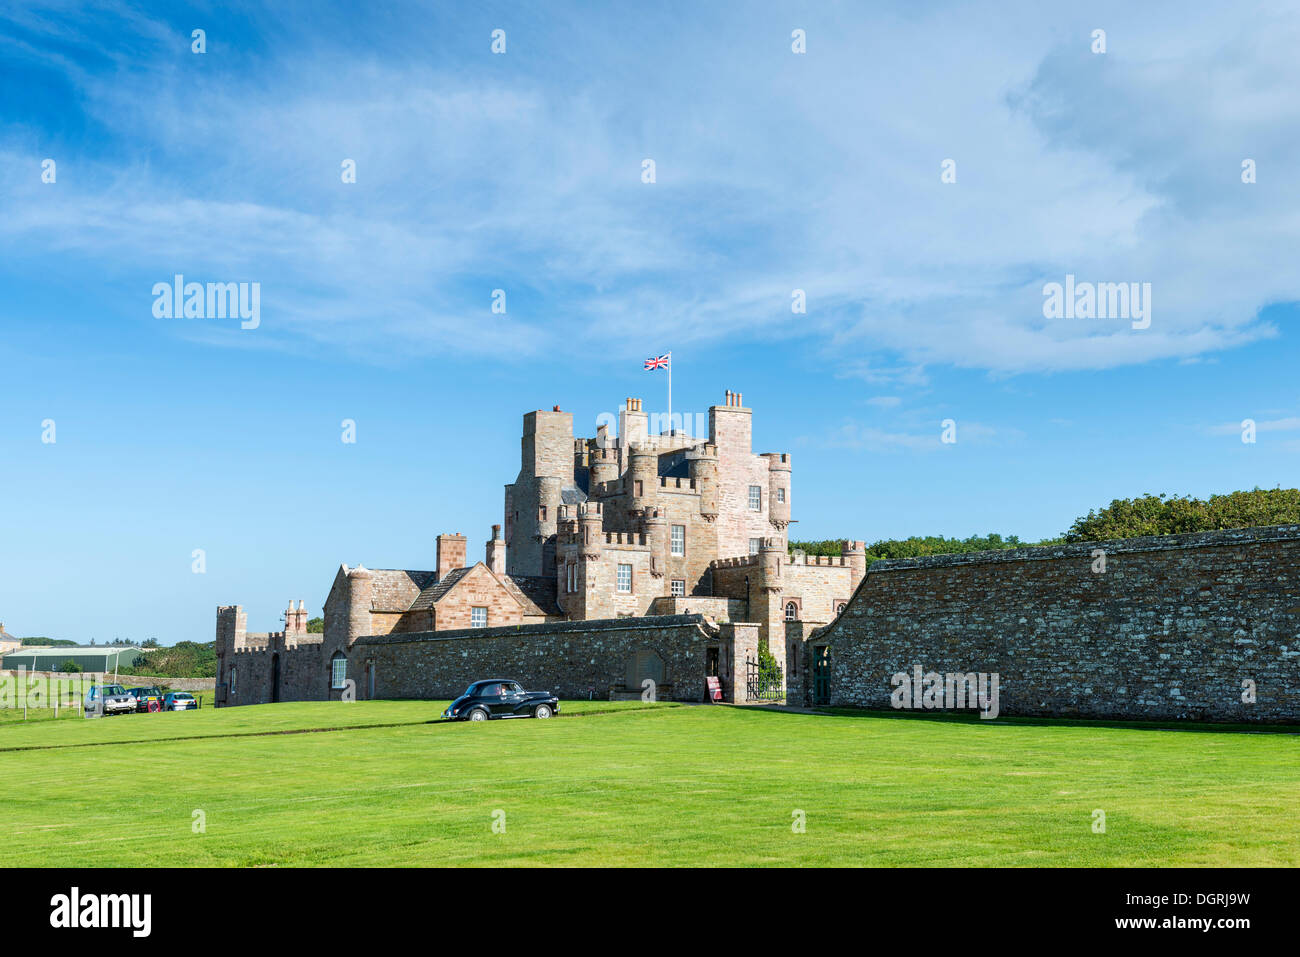 Castle of Mey, formerly Barrogill Castle, a former residence of Queen Mum, Caithness County, Scotland, United Kingdom, Europe Stock Photo